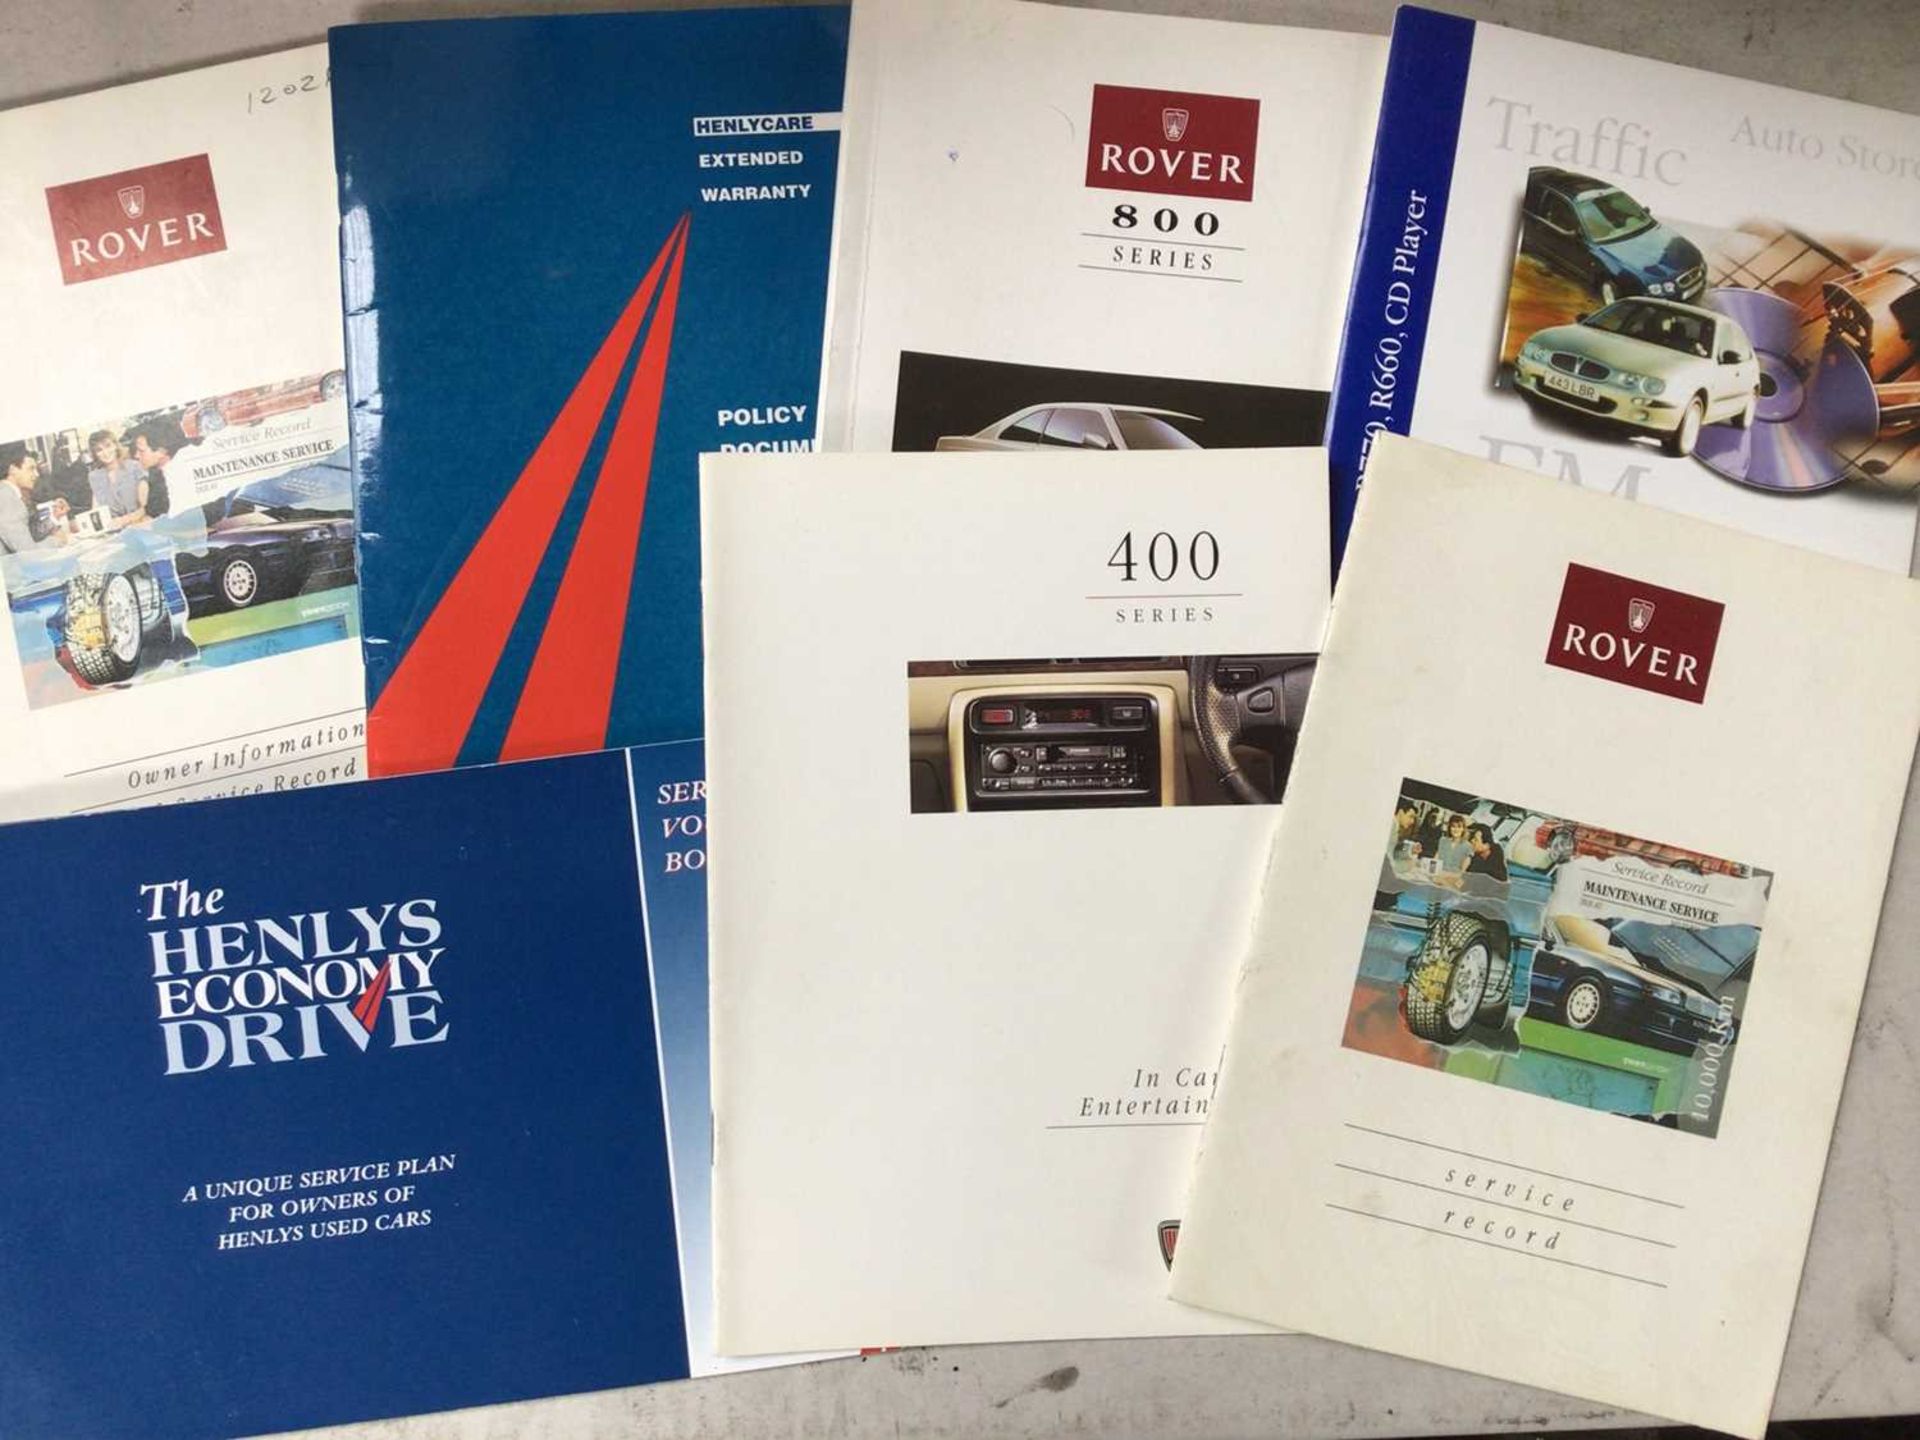 Two boxes of MG Rover car handbooks